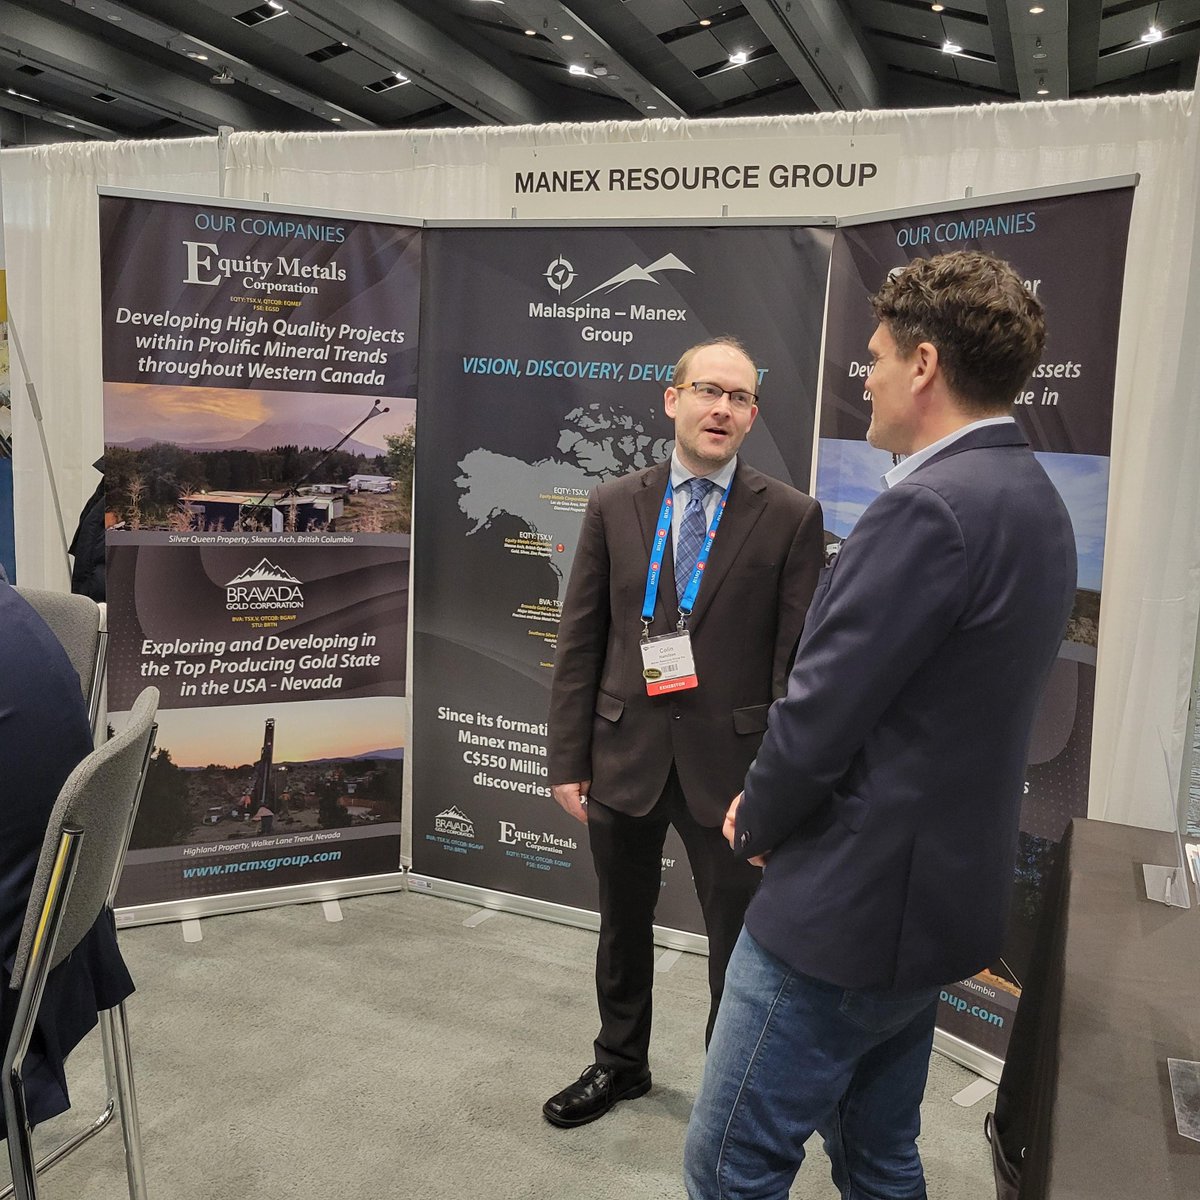 Last day of #PDAC2024, and still full of energy! Thank you to everyone who stopped by our booth and joined the one-to-one meetings. Congratulations to @the_PDAC for another fantastic convention! Looking forward to connecting again at #PDAC2025. #investors #Juniormining